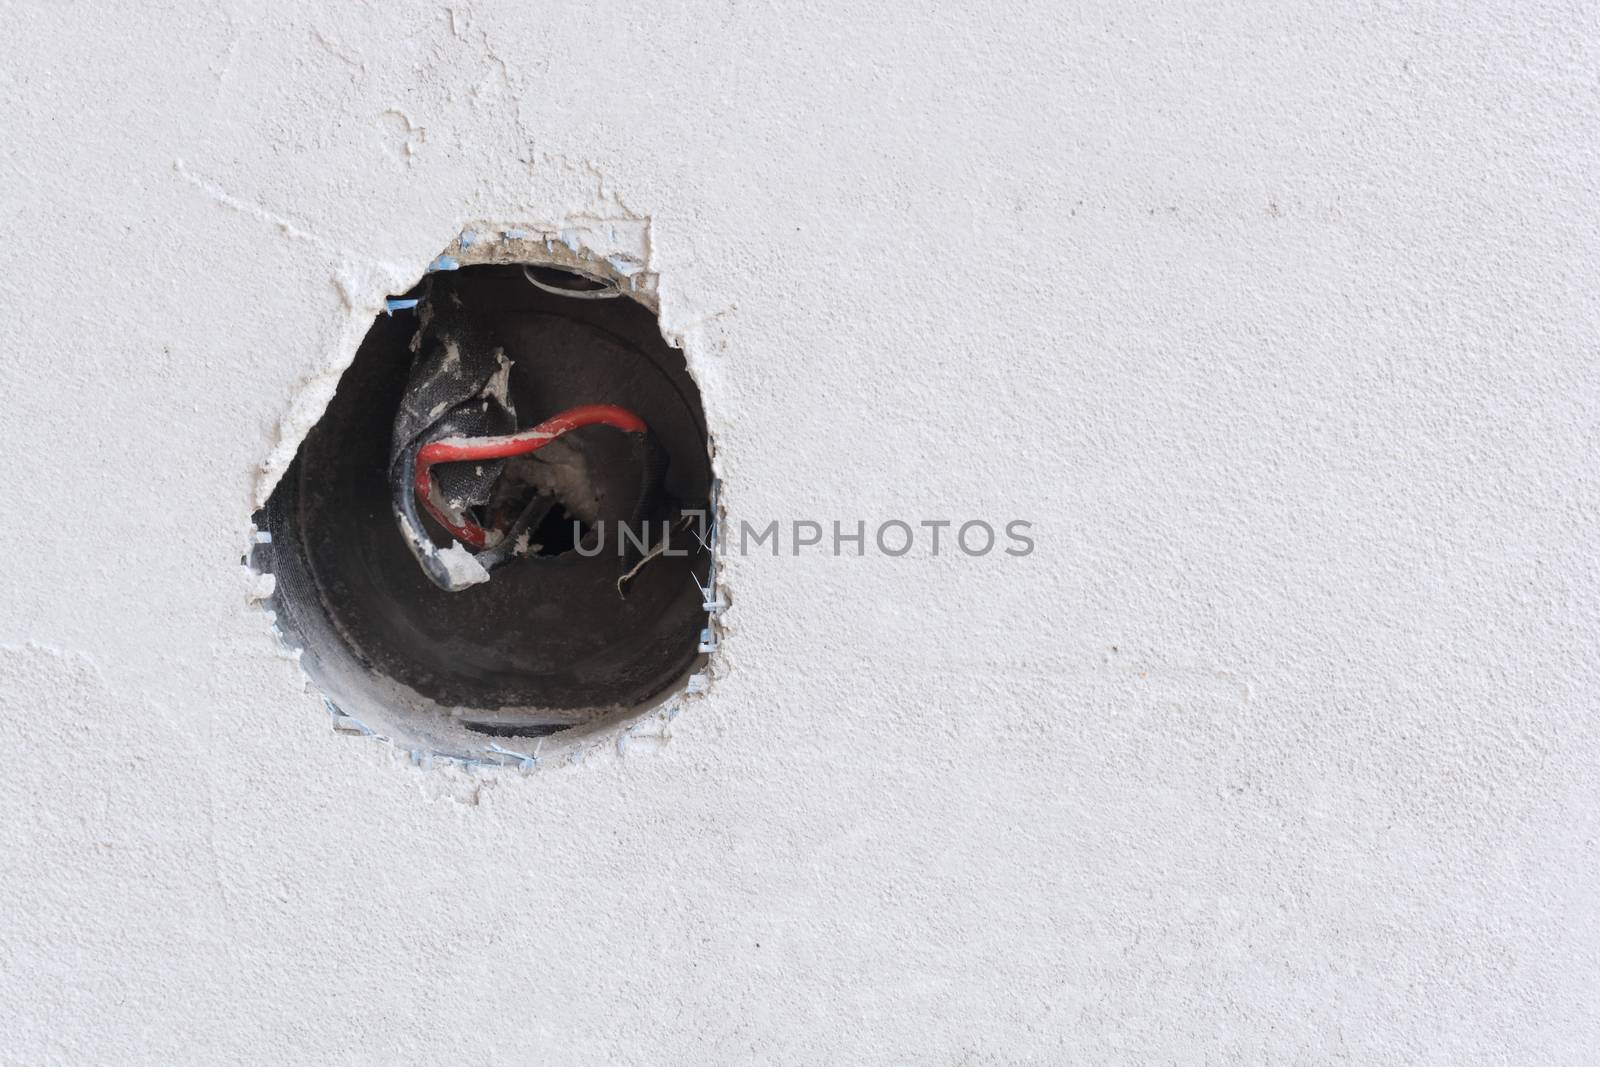 exposed wires in electrical outlet by milinz